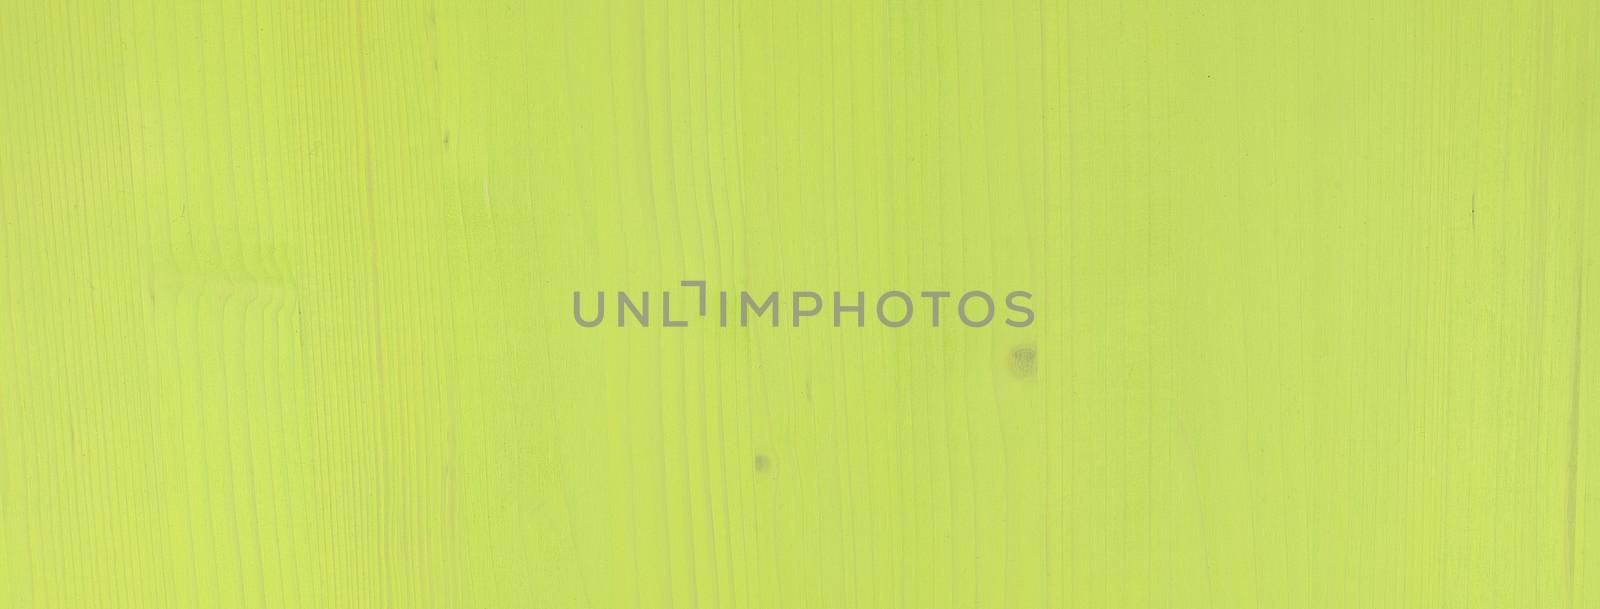 Texture of a green wooden board by marcorubino